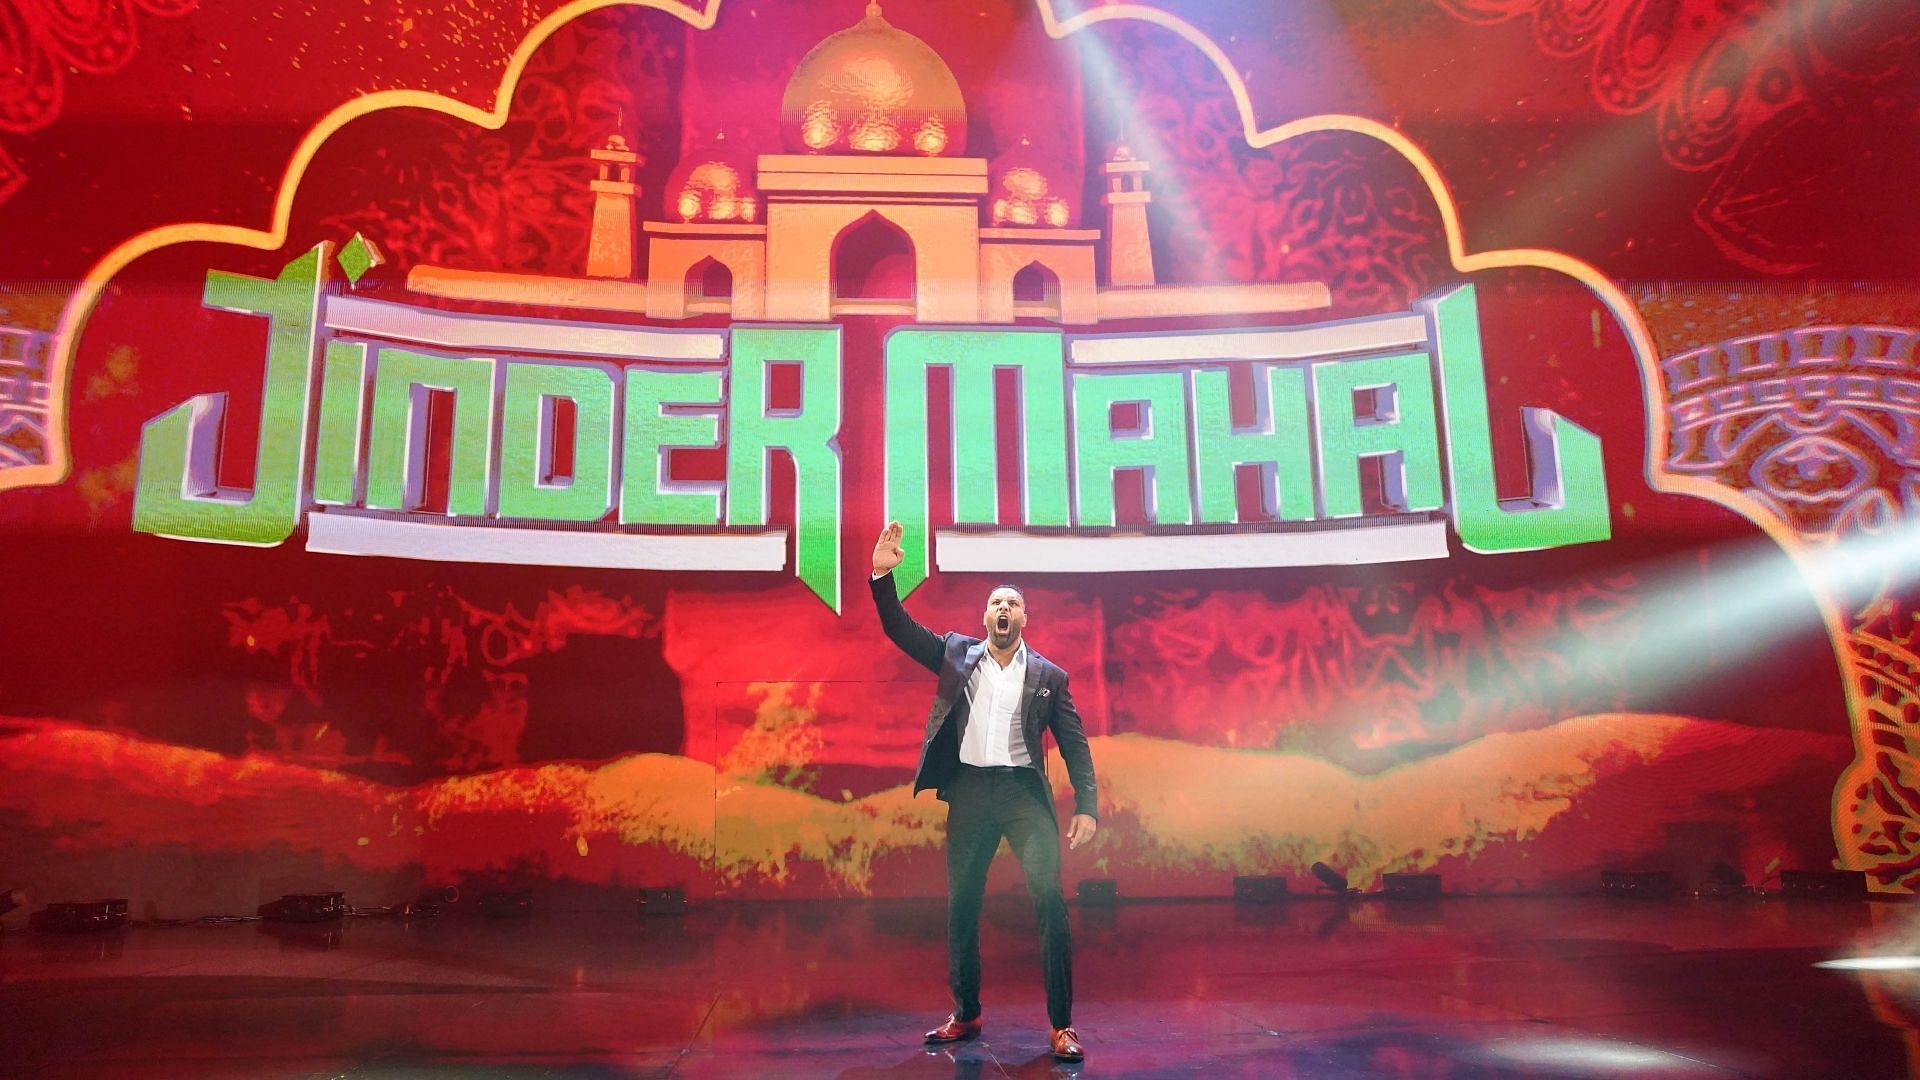 Jinder Mahal heads to the ring on WWE RAW